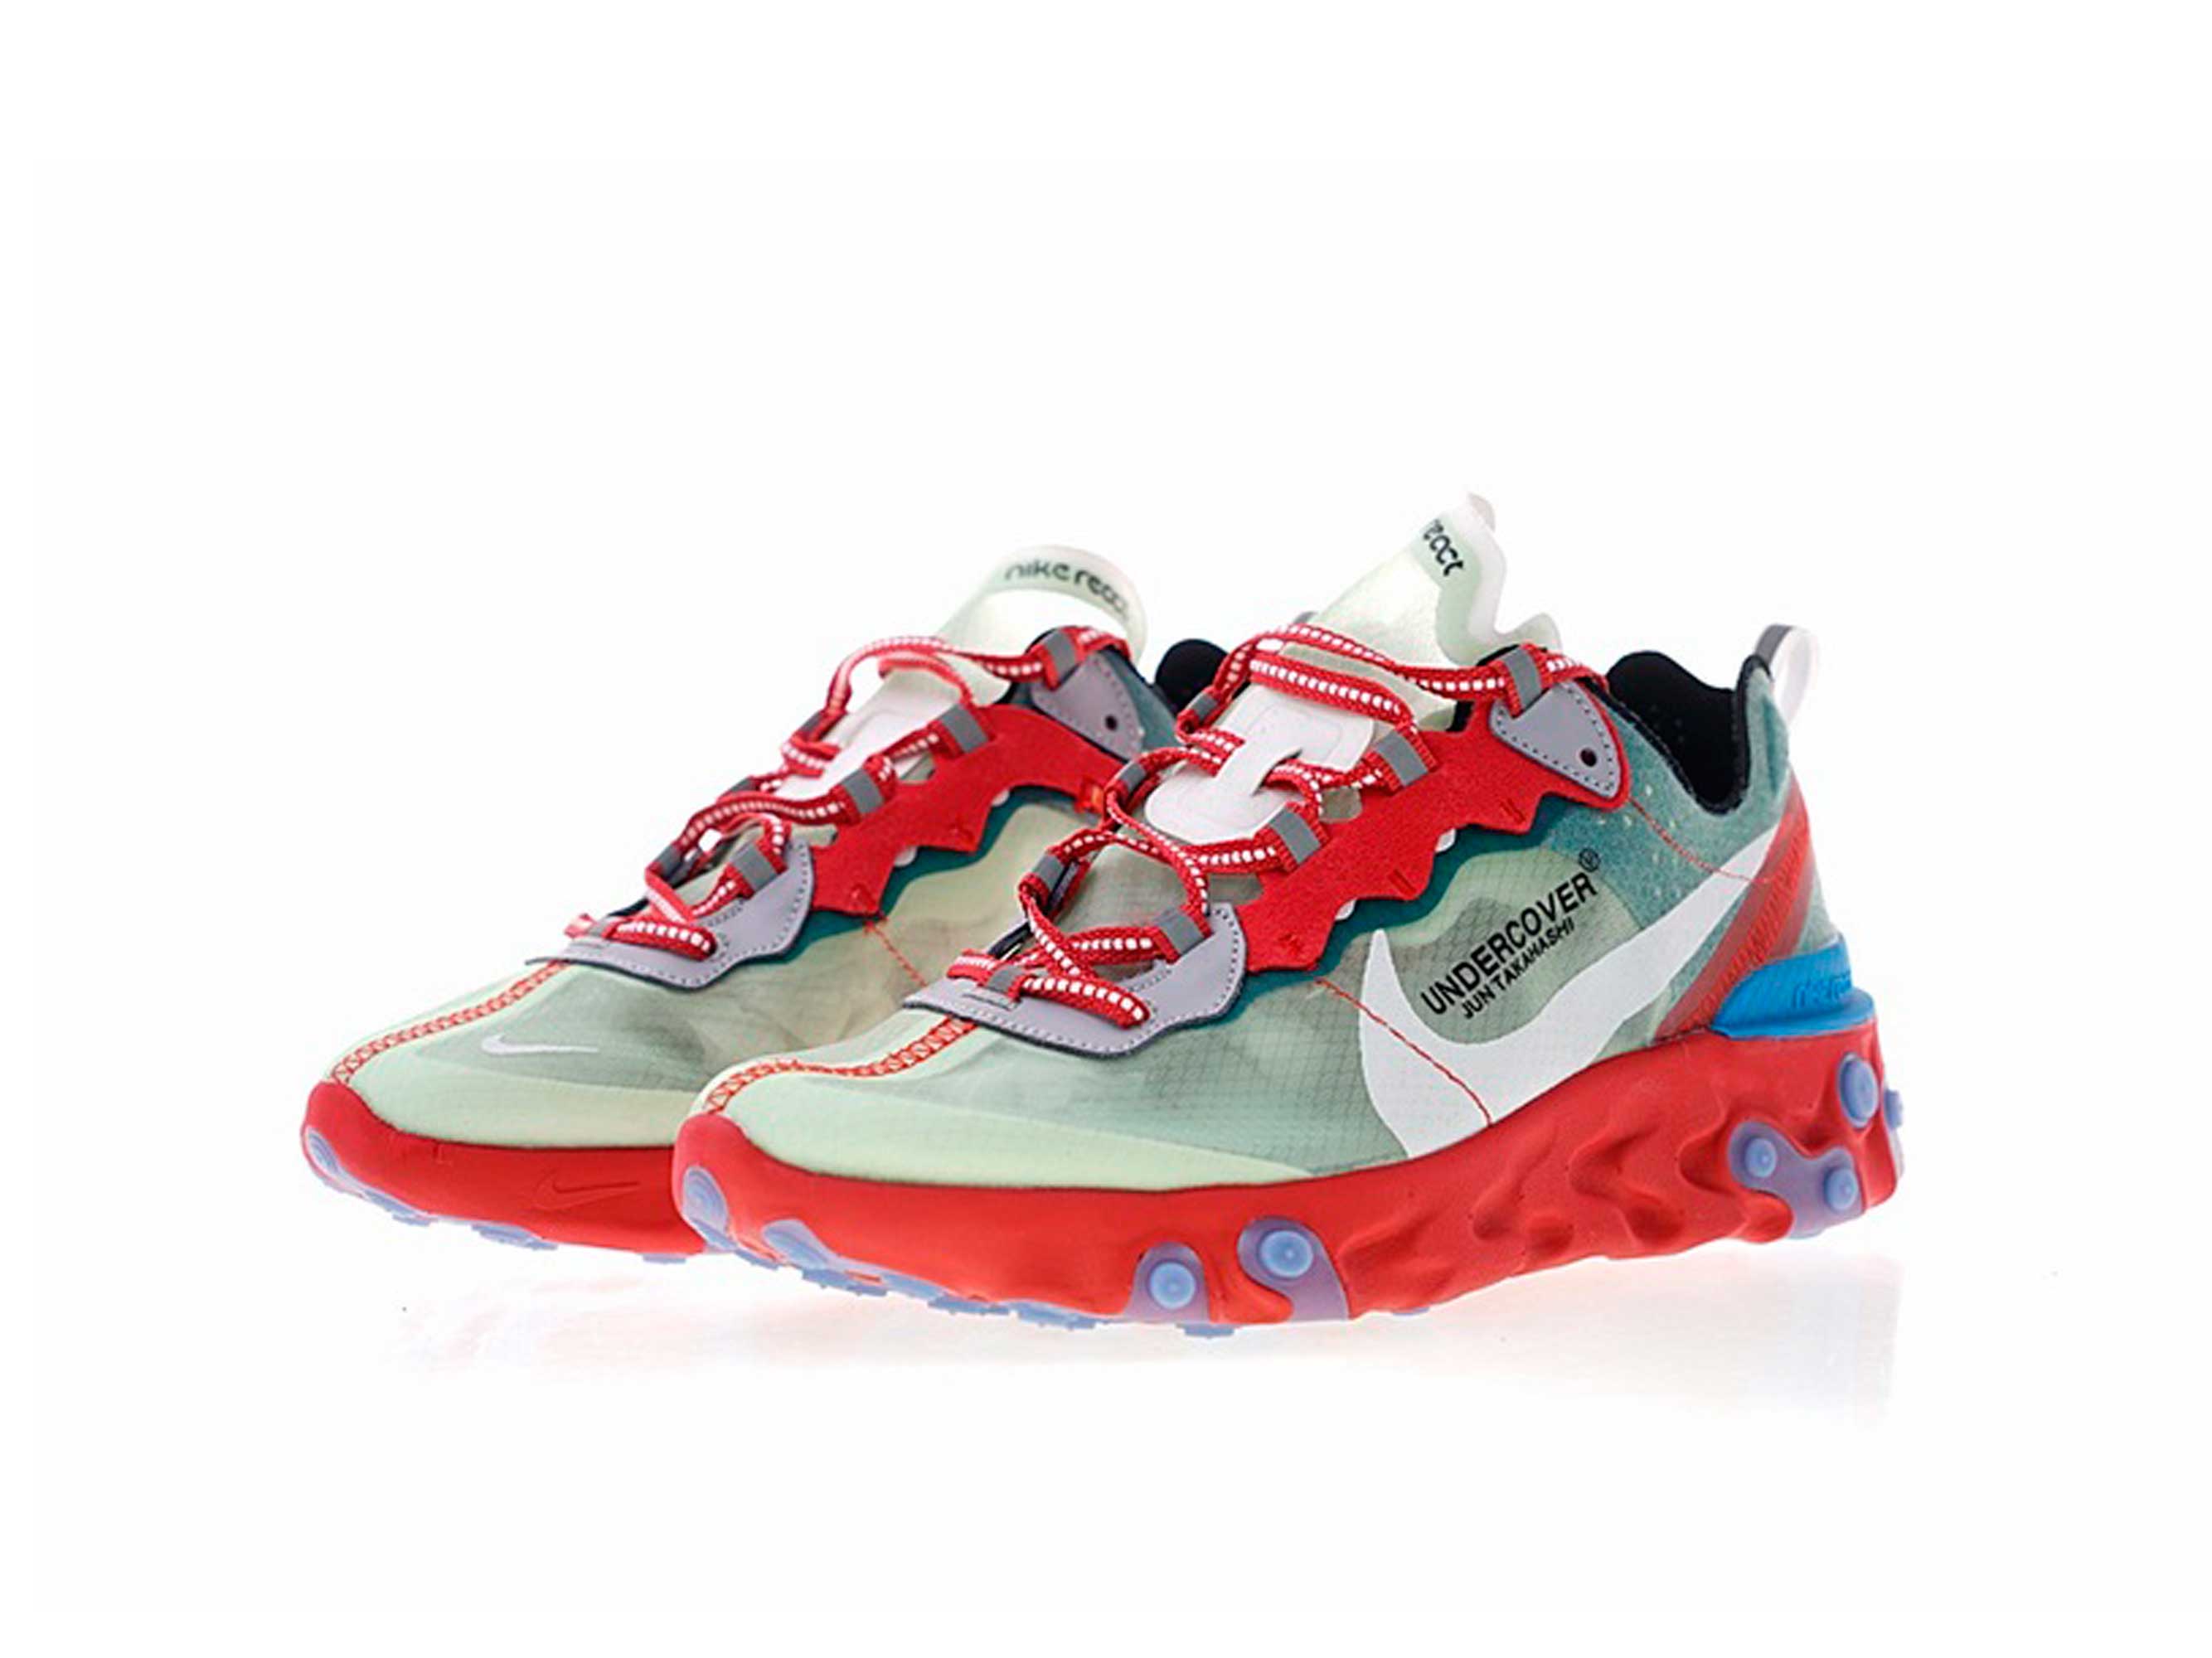 undercover nike react element 87